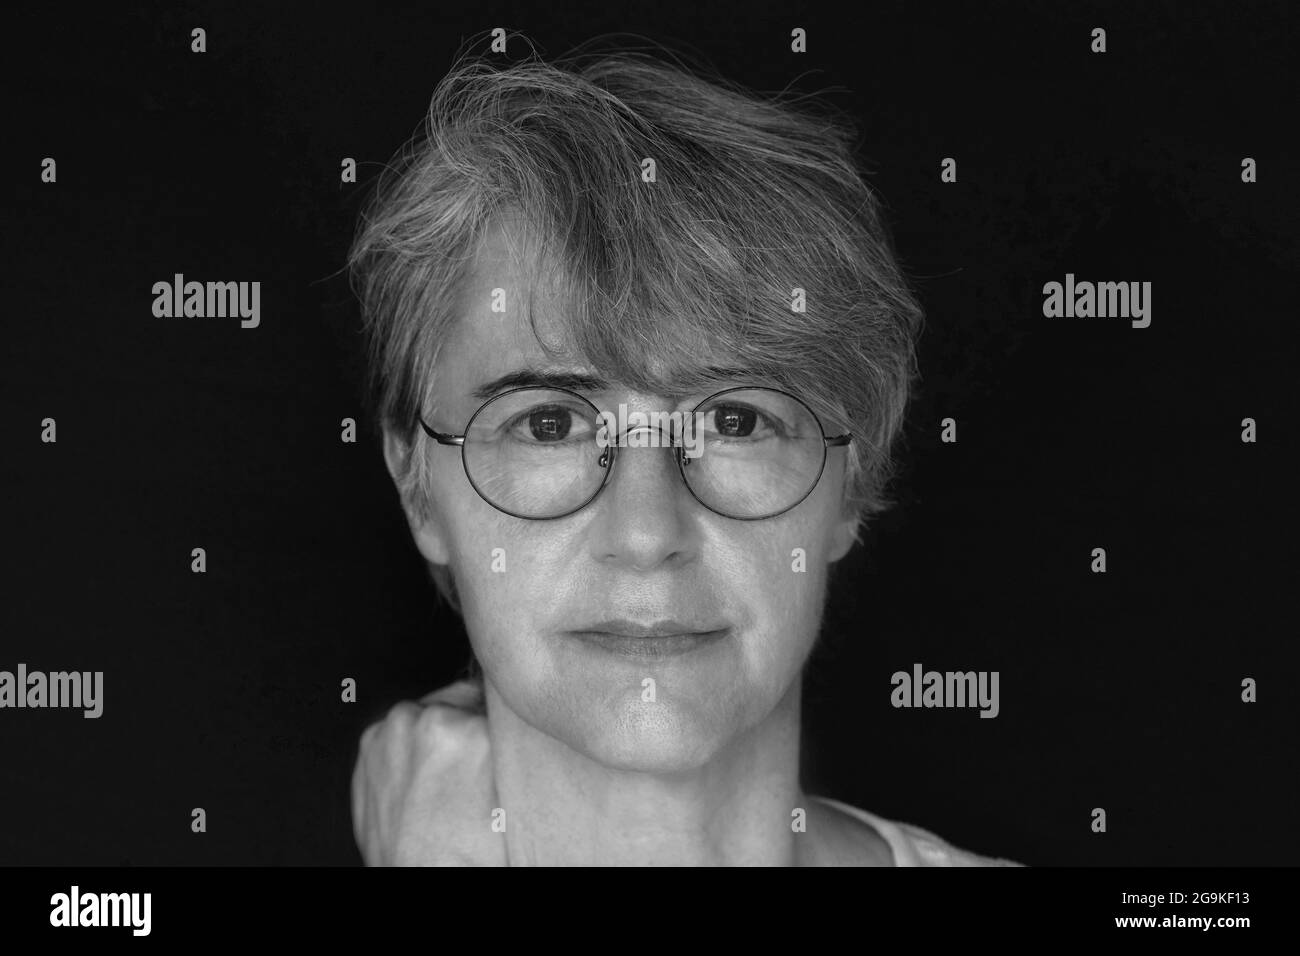 Portrait of a 50 year old woman with glasses Stock Photo